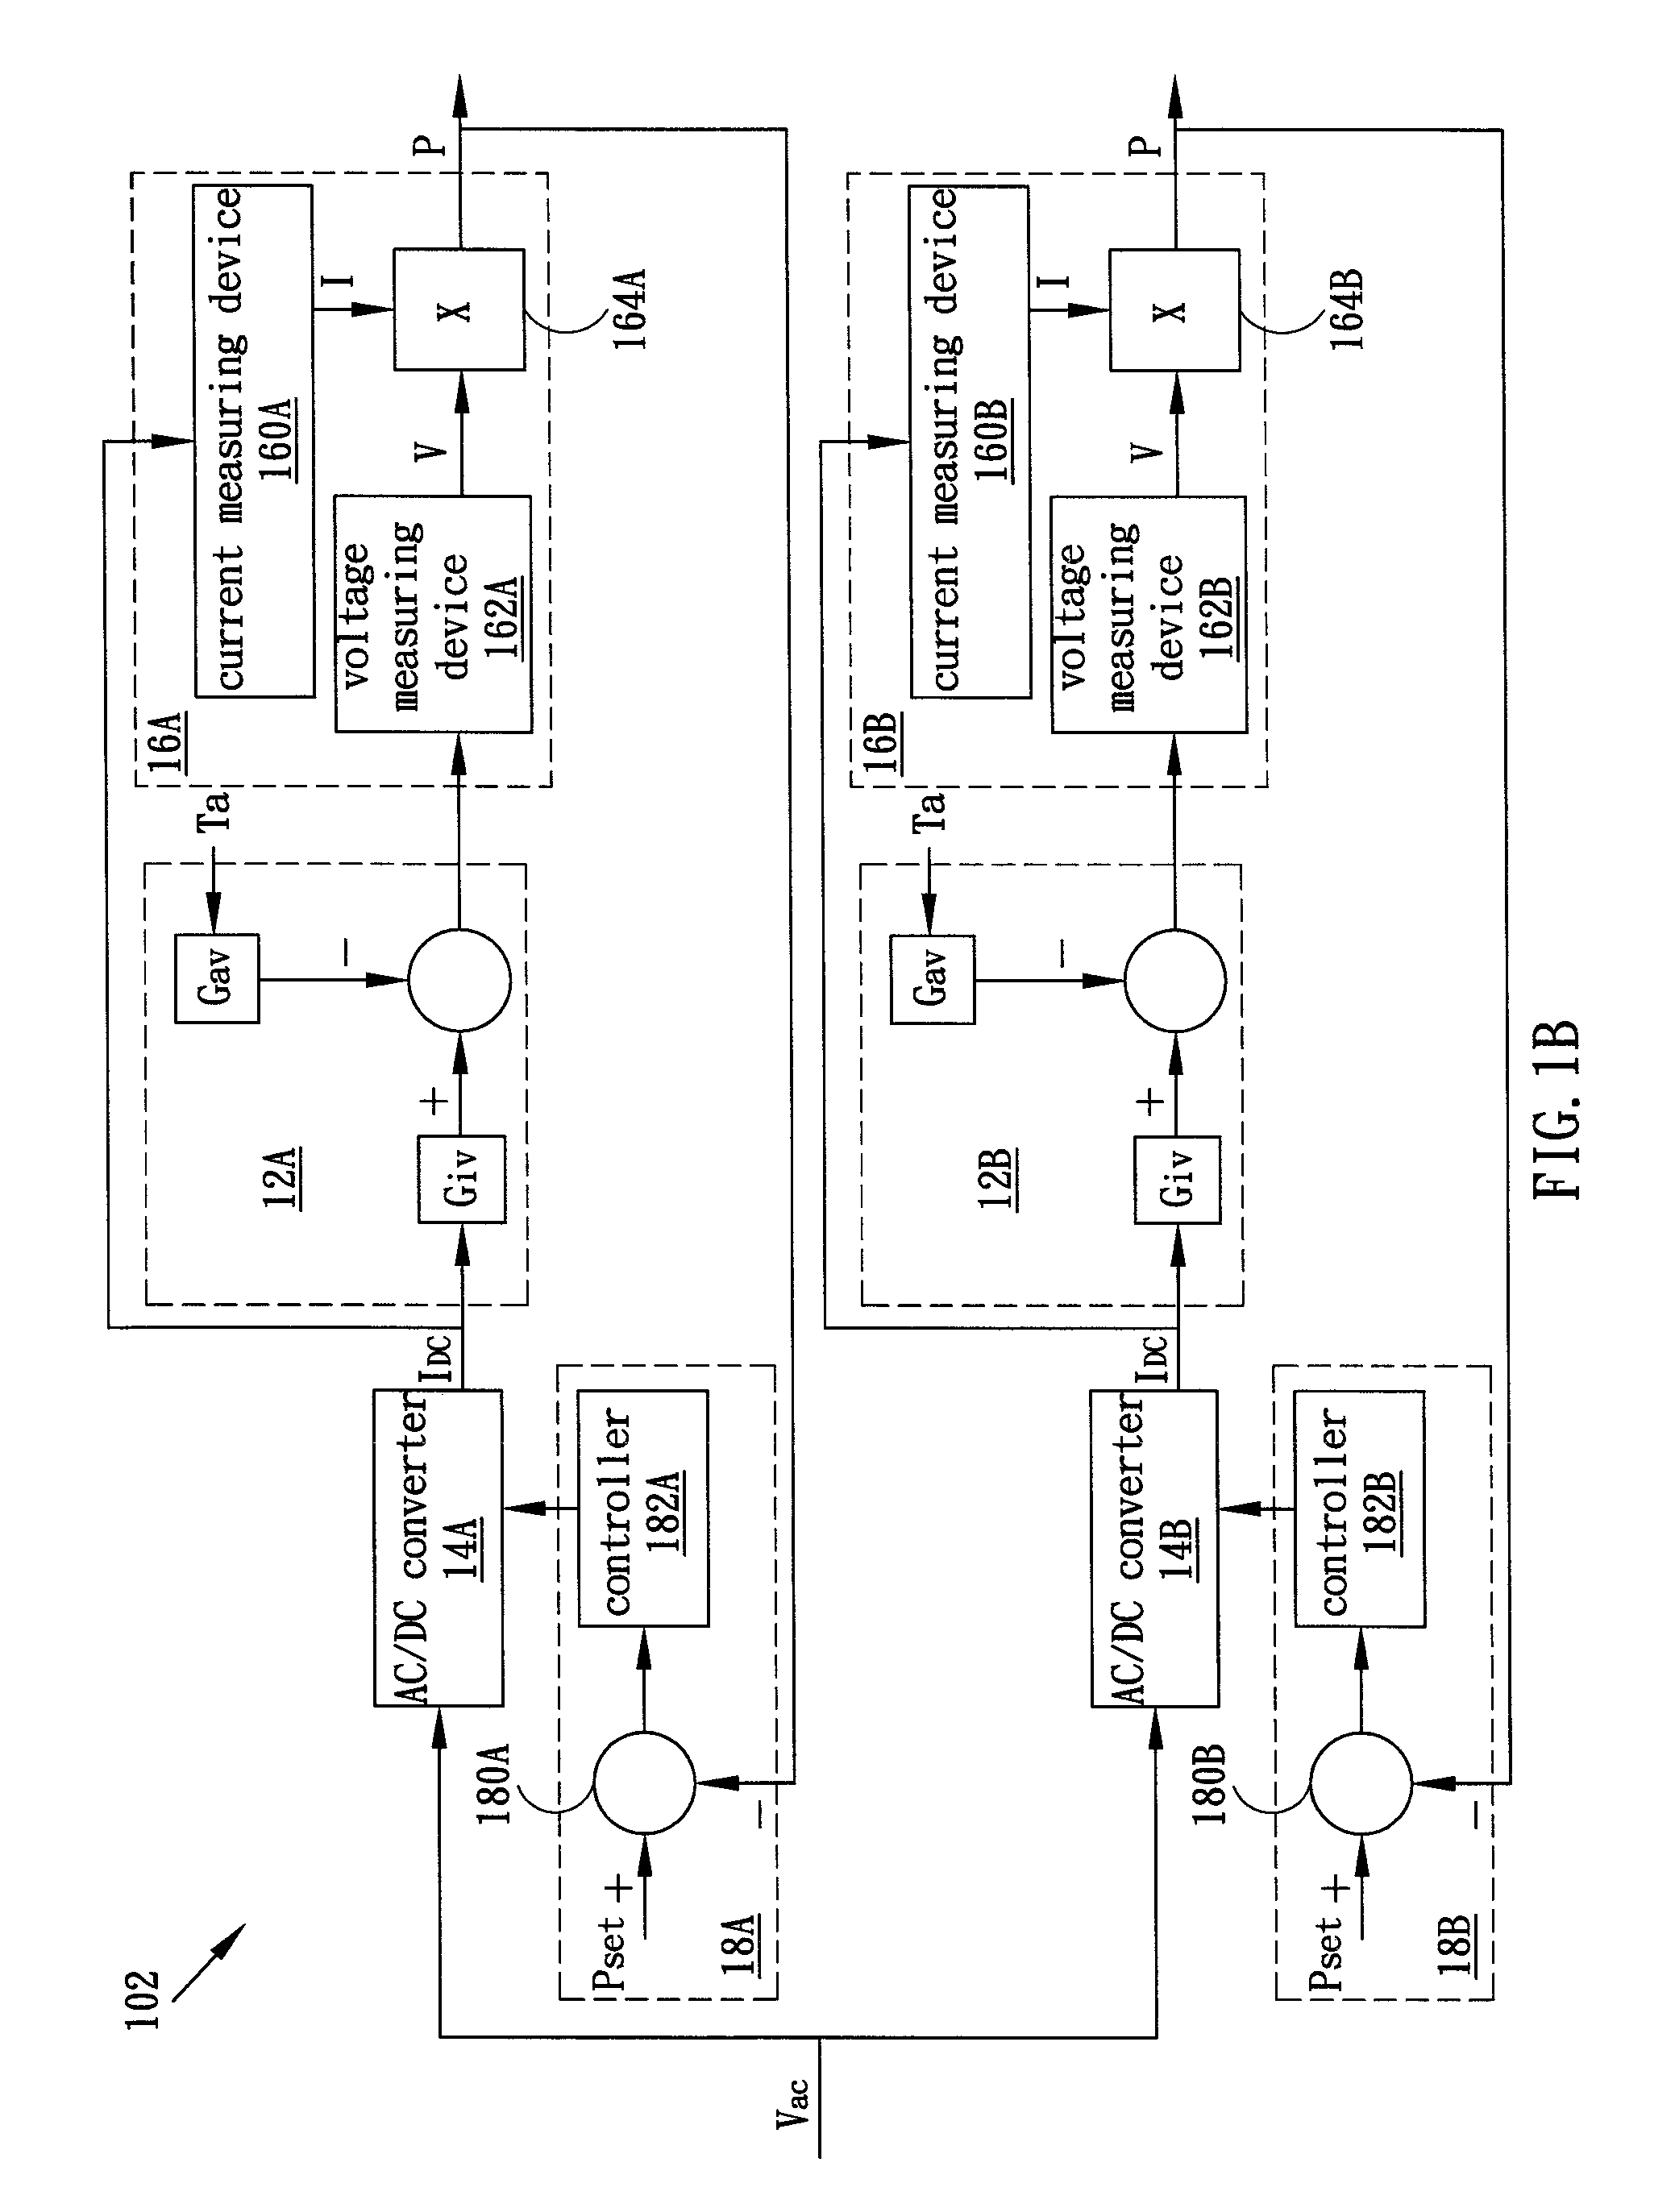 Apparatus for controlling light emitting devices